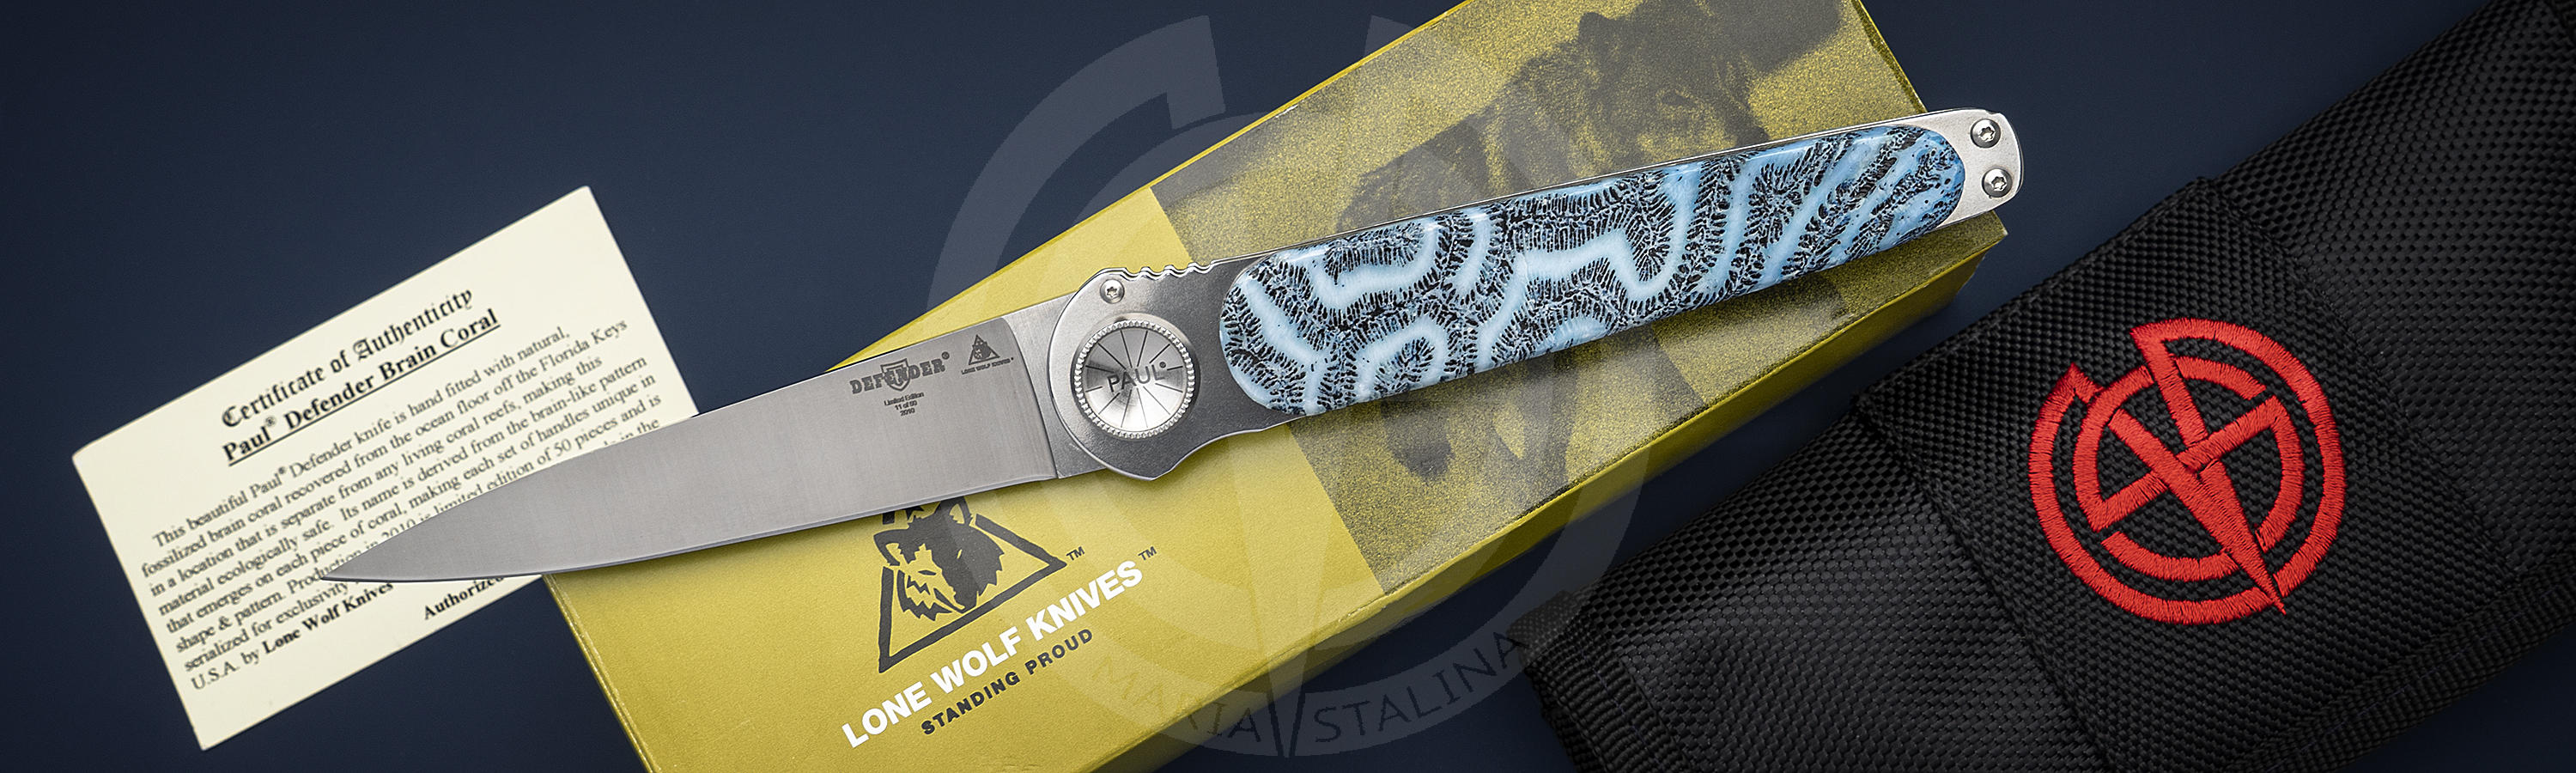 lone-wolf-knives-defender-brain-coral-7